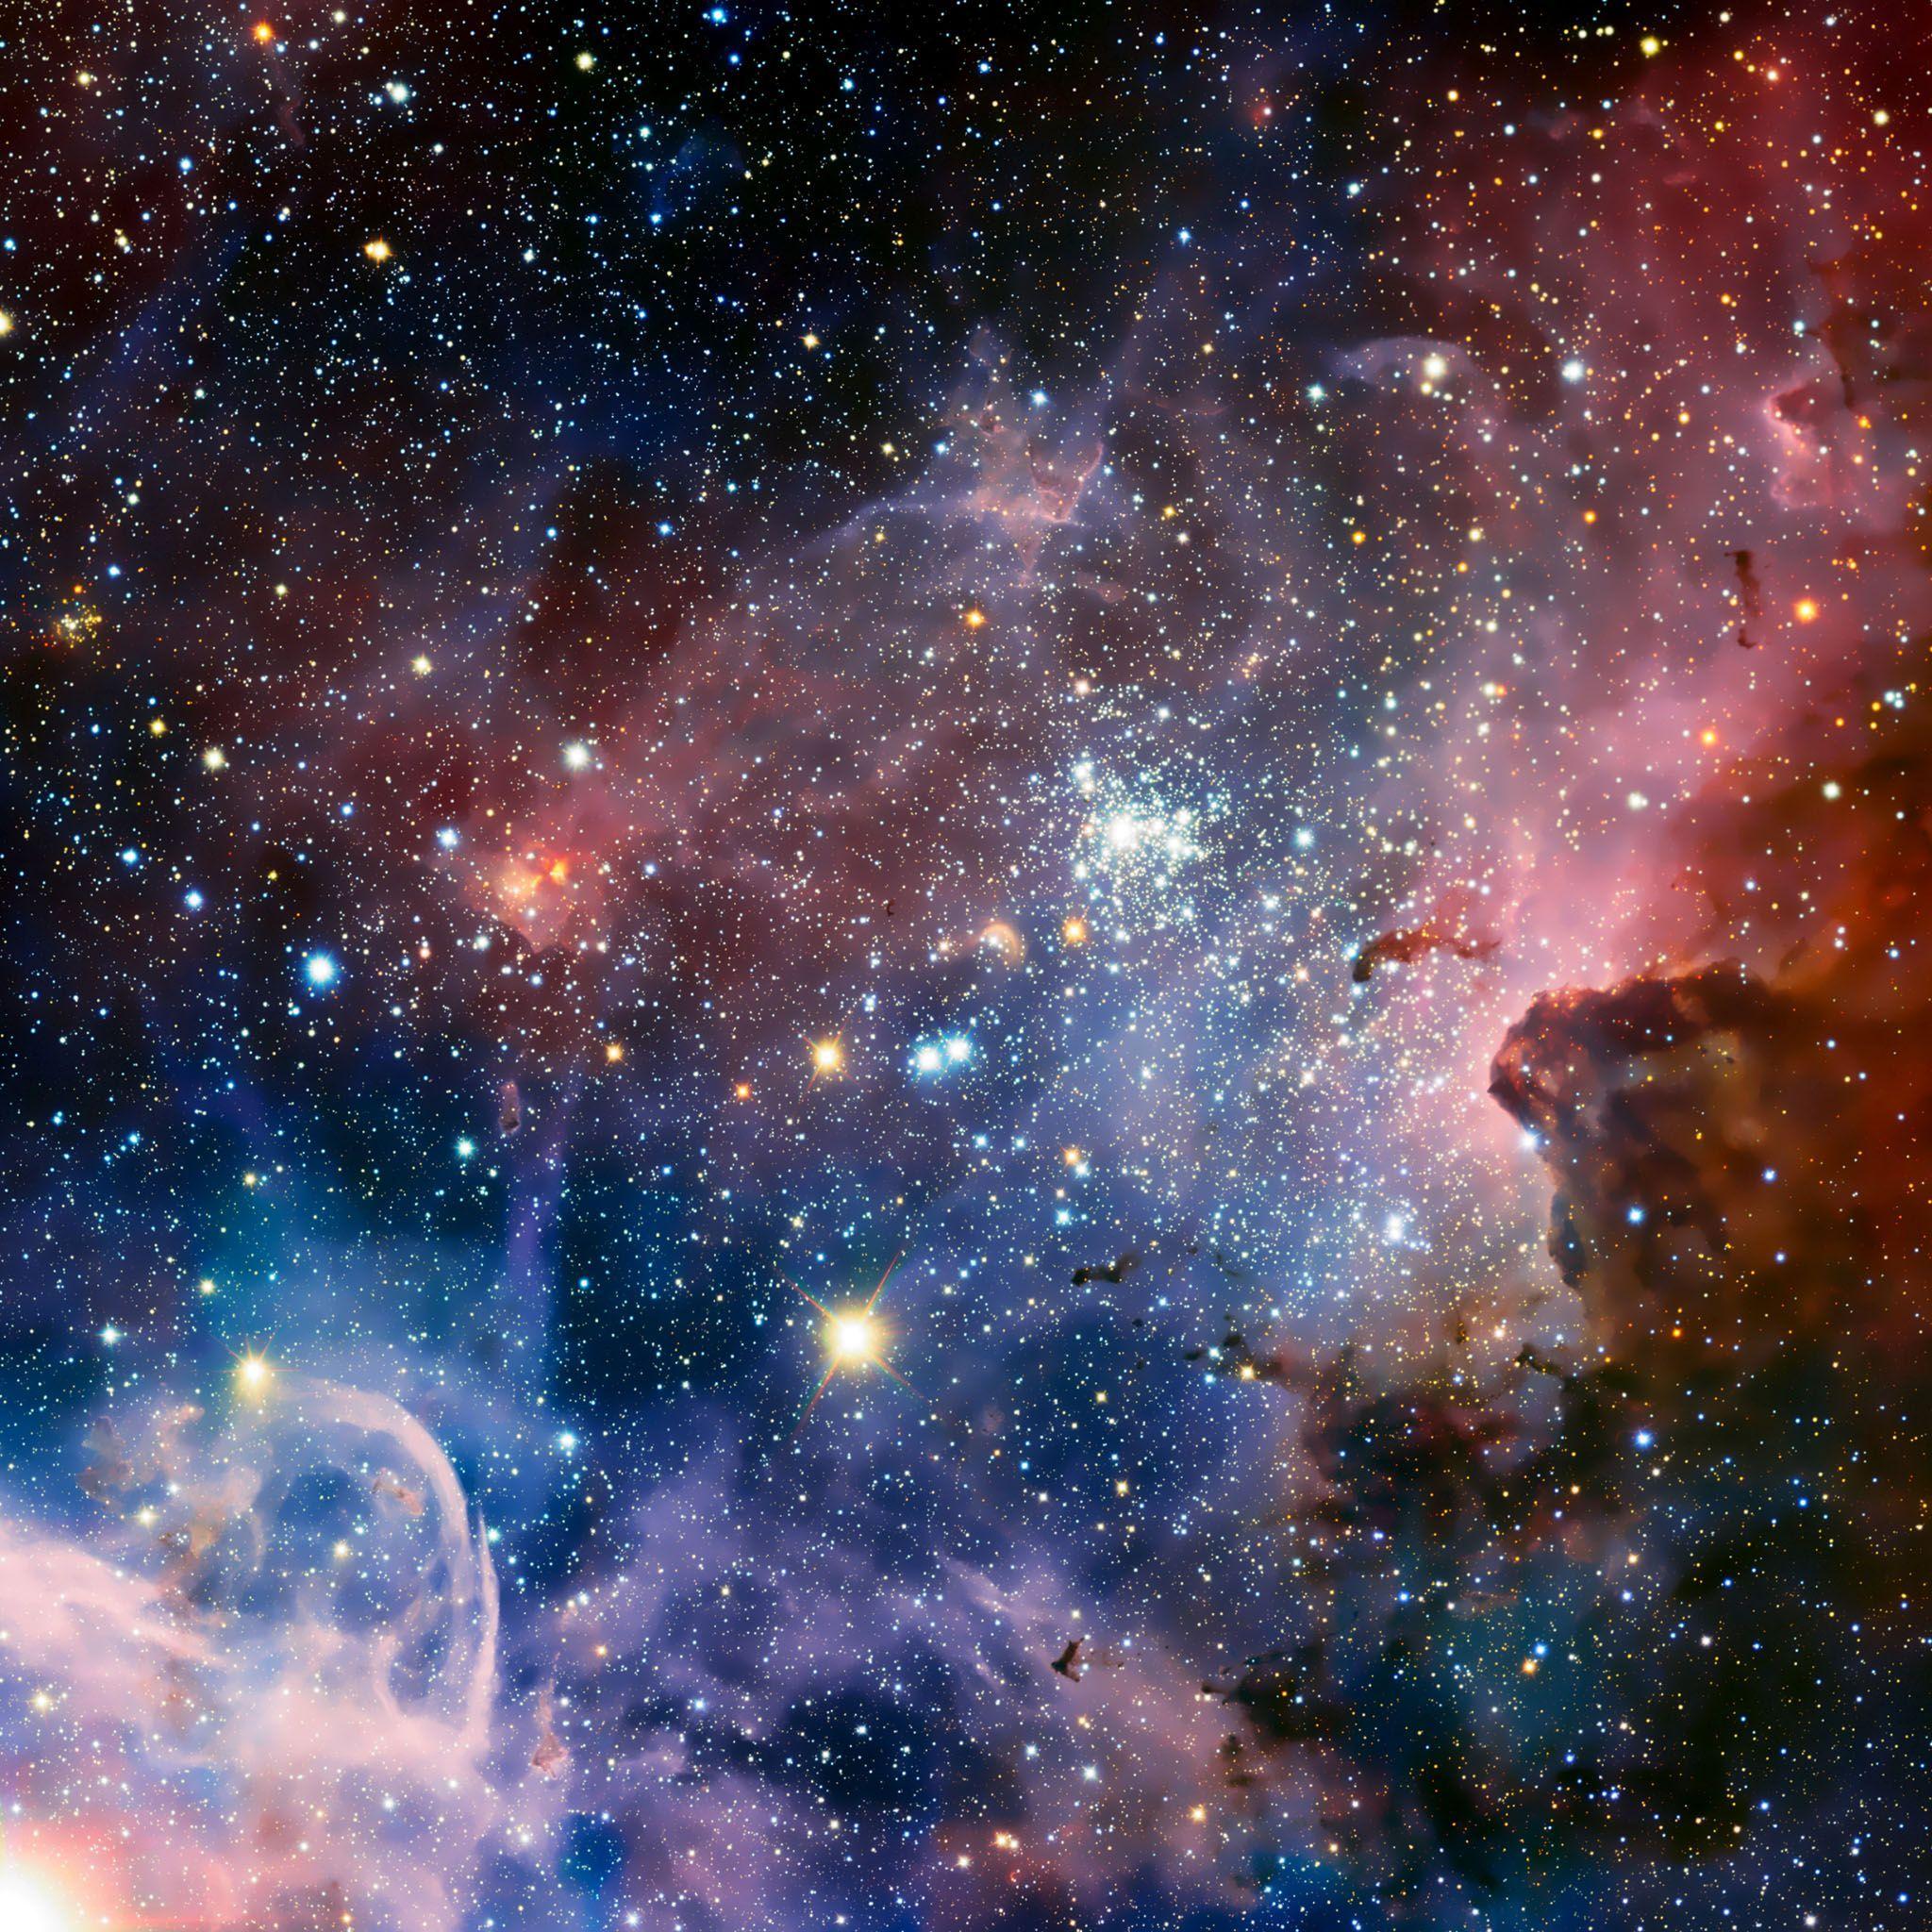 Space Ipad Wallpapers Top Free Space Ipad Backgrounds Wallpaperaccess